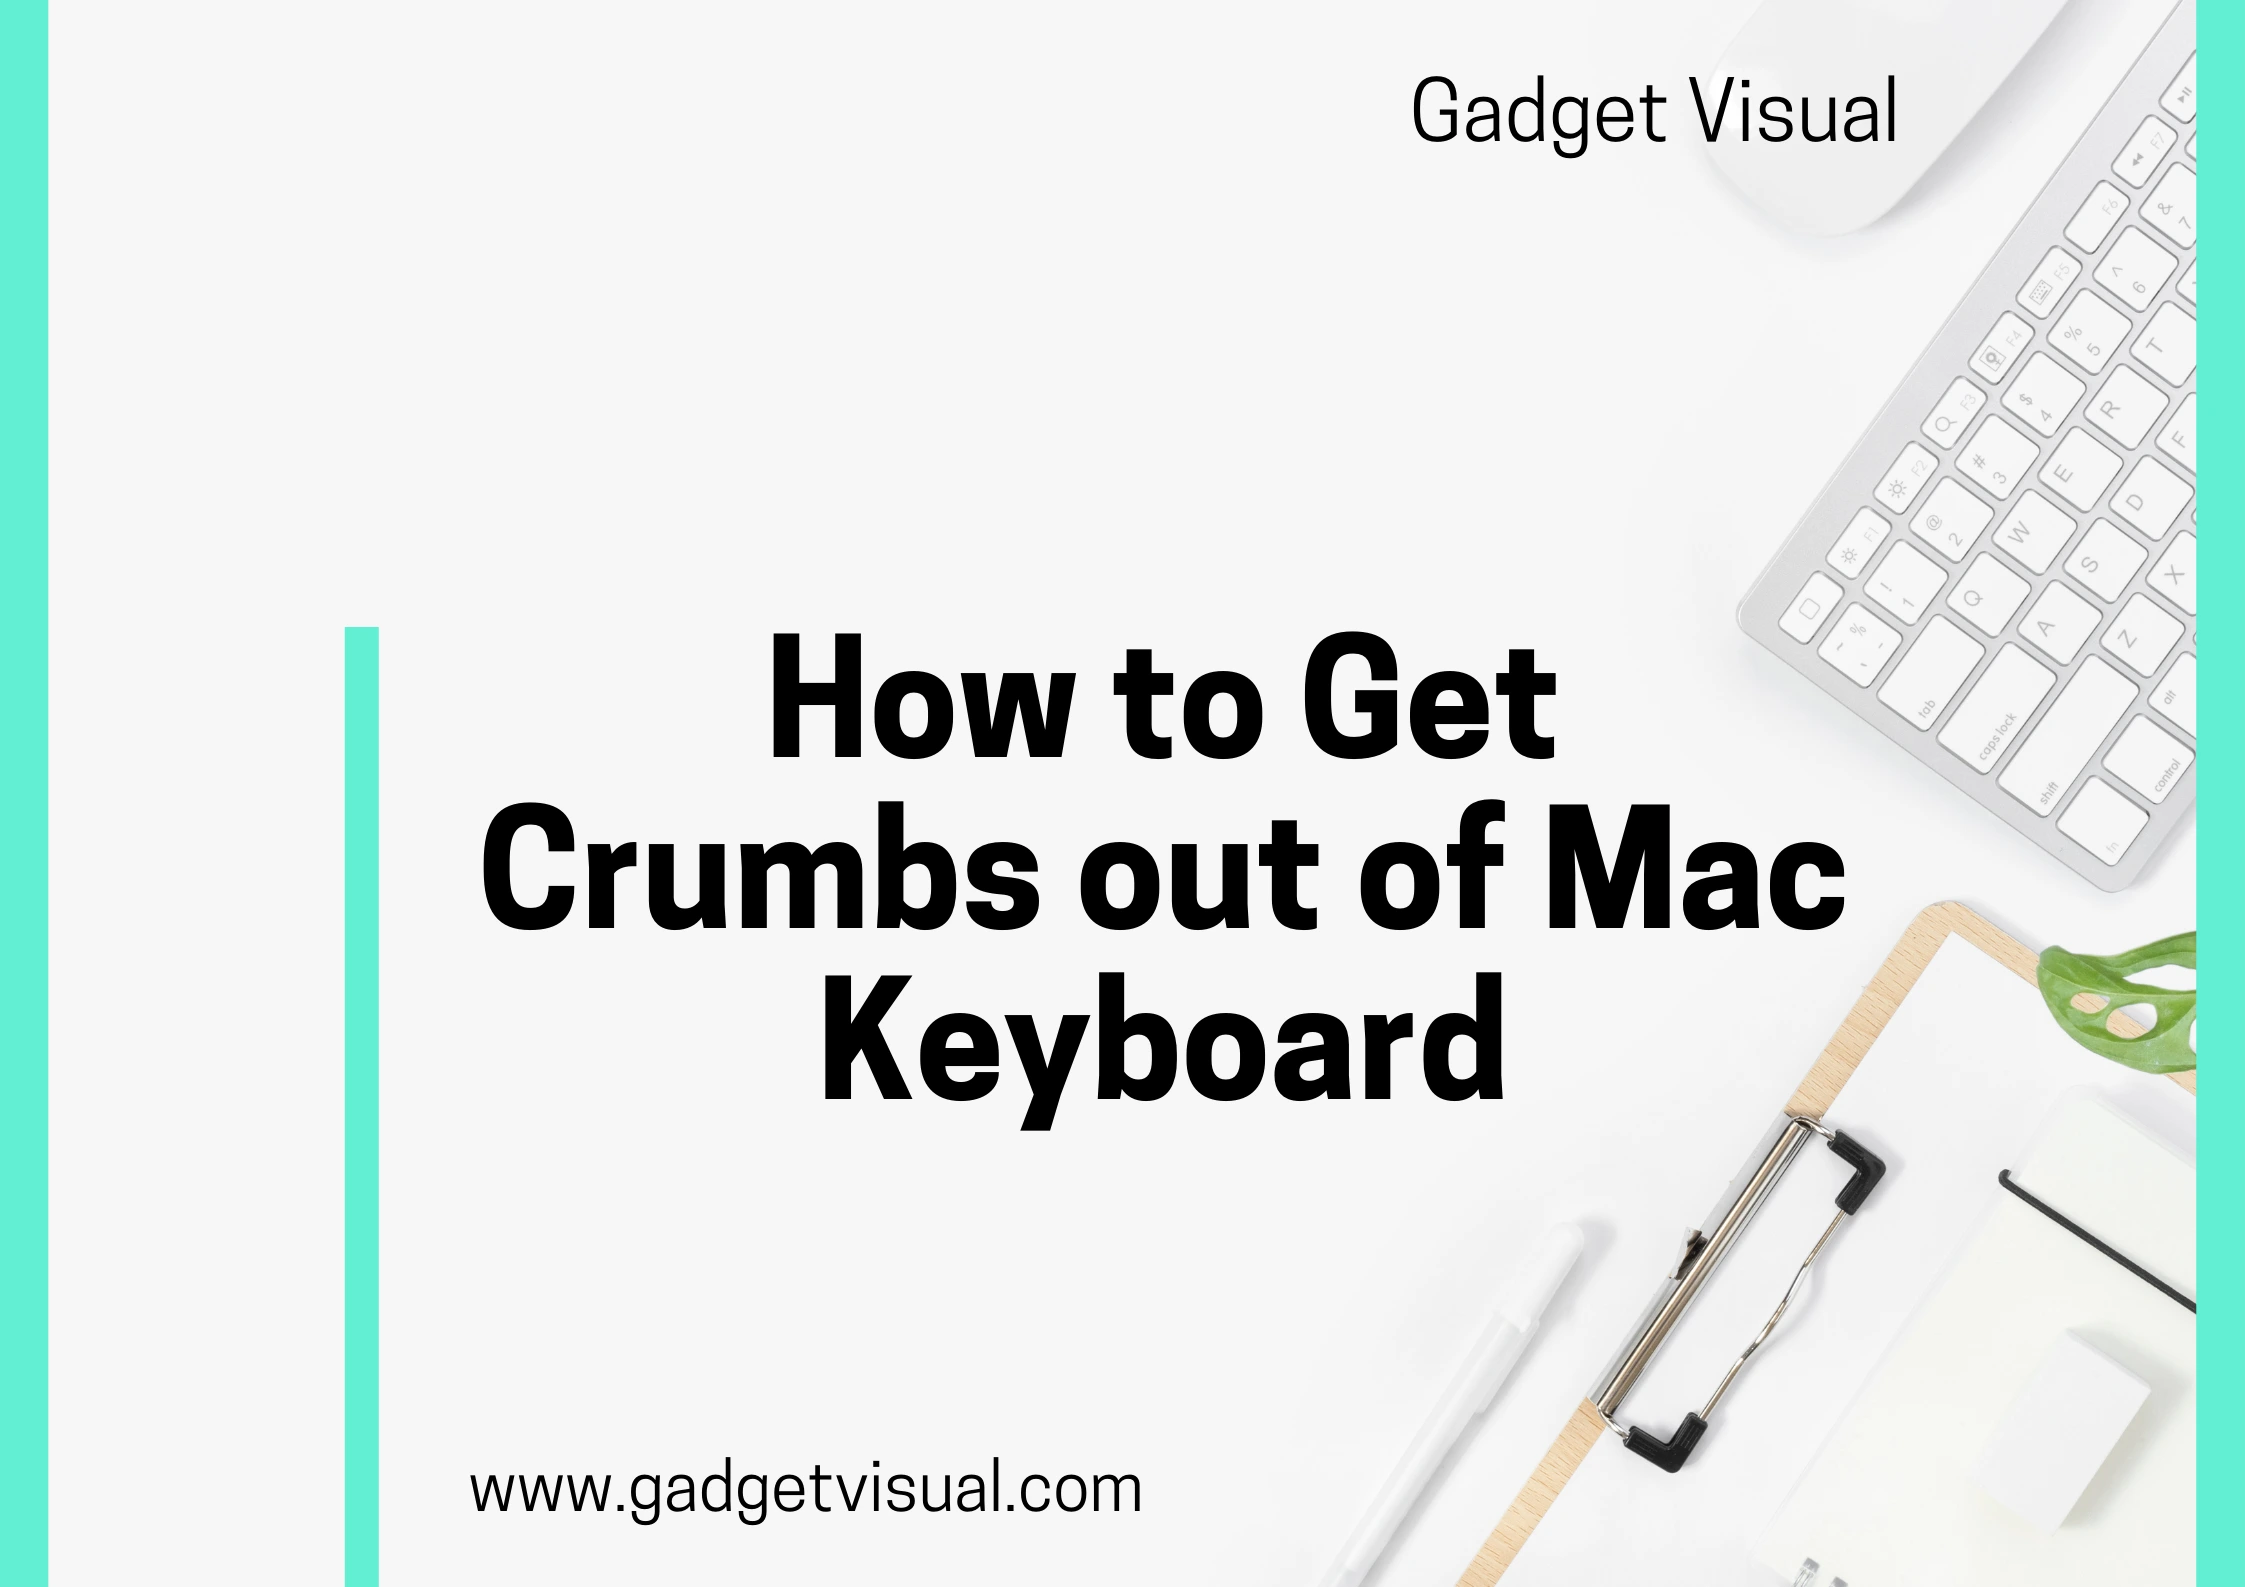 how to get crumbs out of mac keyboard